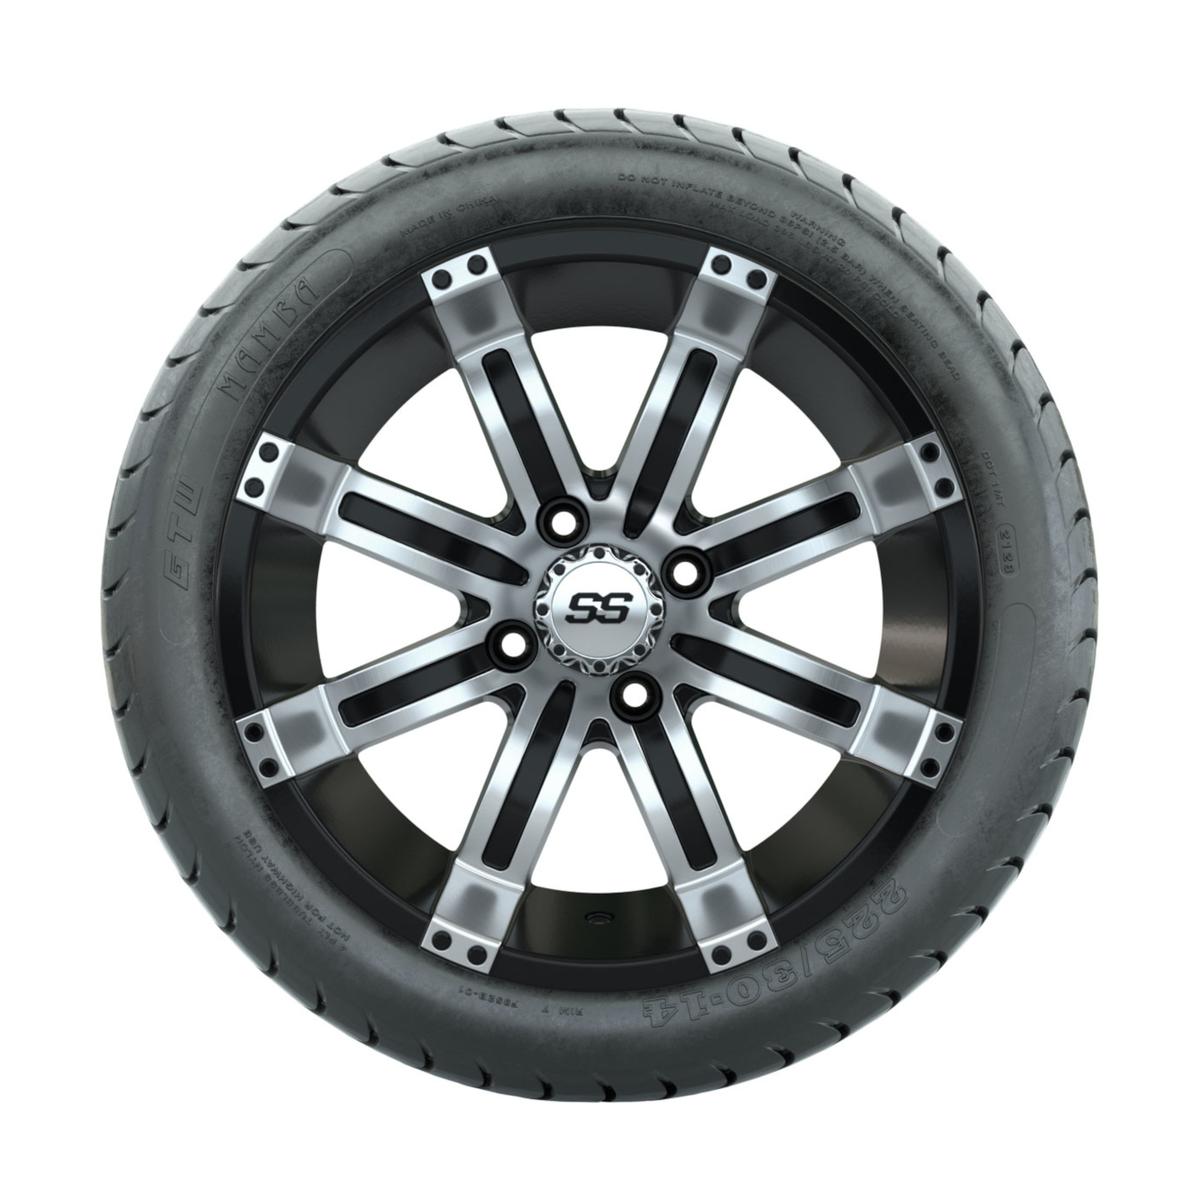 14” GTW Tempest Machined/Black Wheels with Mamba Street Tires – Set of 4